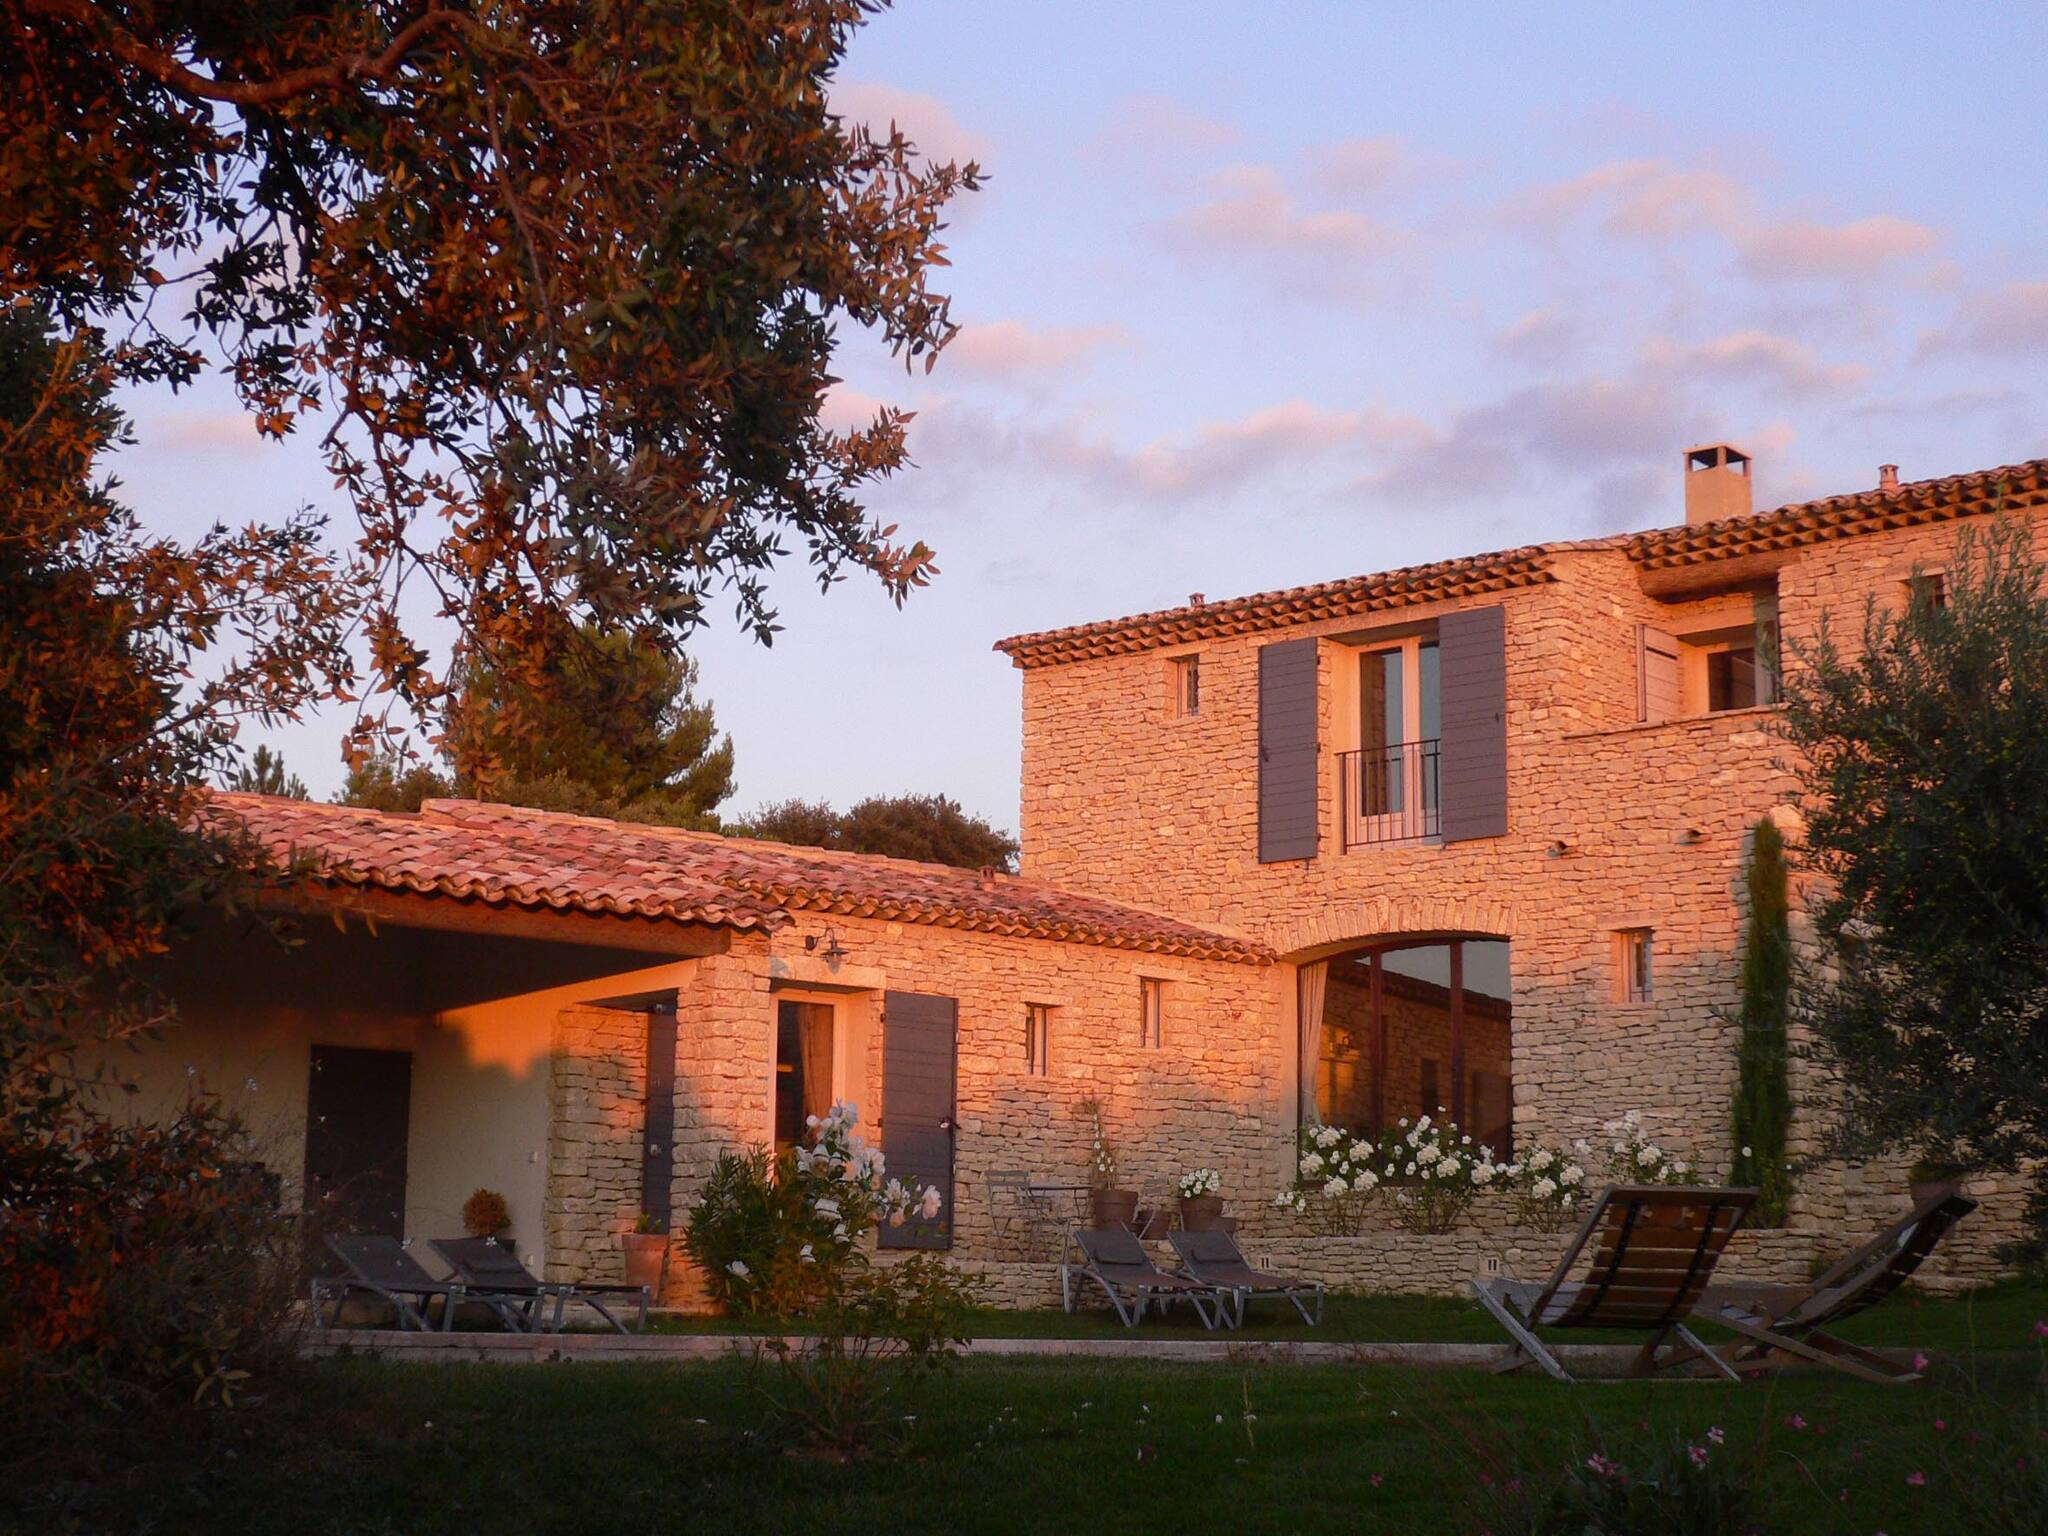 Property Image 1 - Superb air-conditioned house with heated pool in Gordes - by feelluxuryholydays